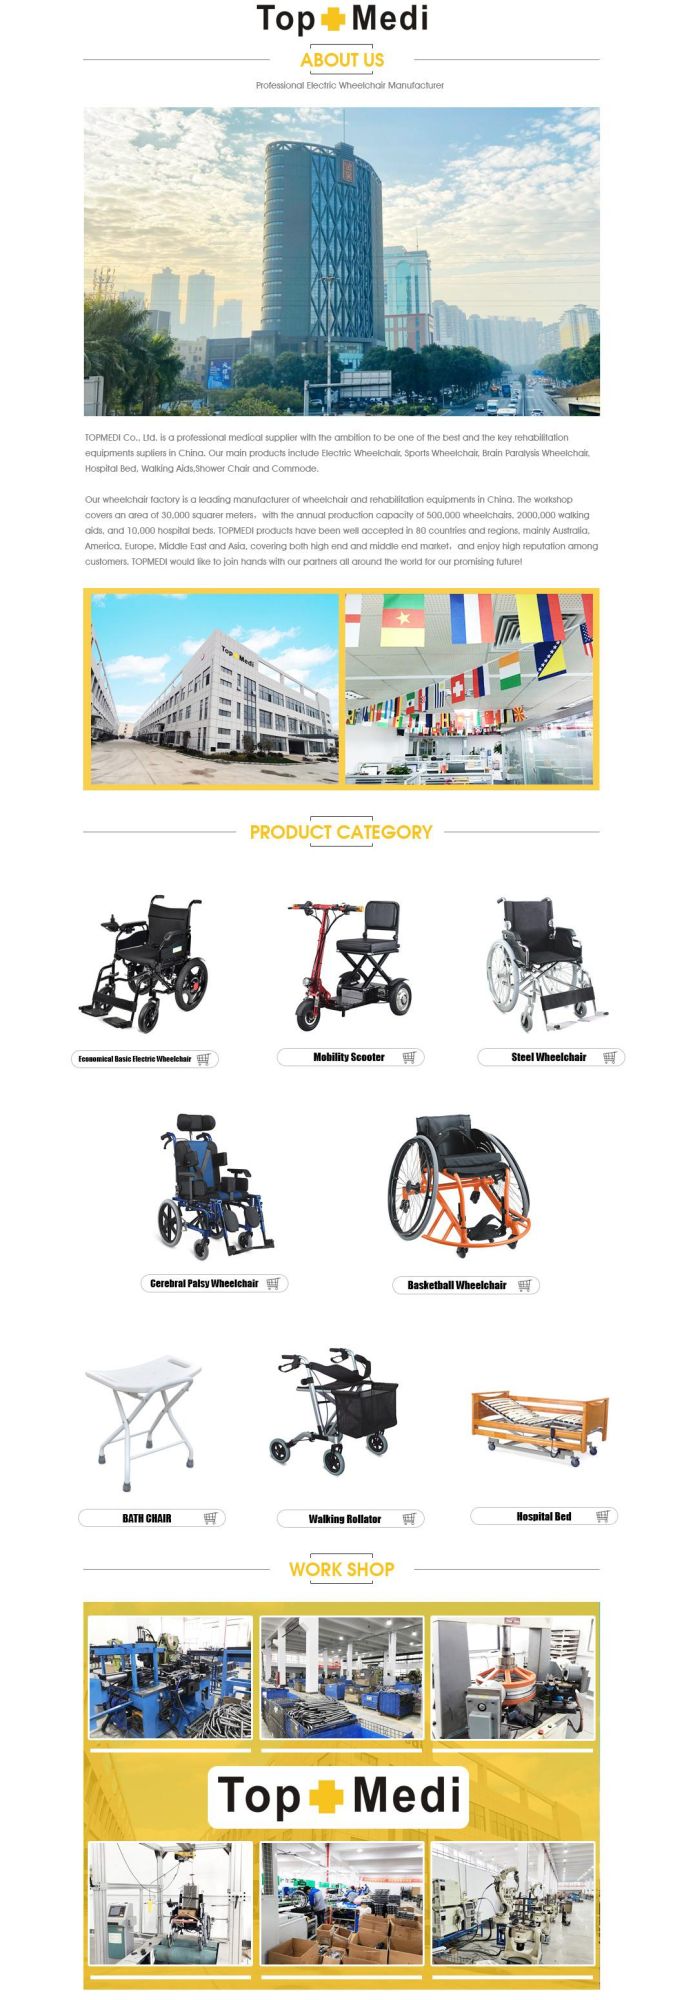 New Black Foldable Electric Power Wheelchair for Adults